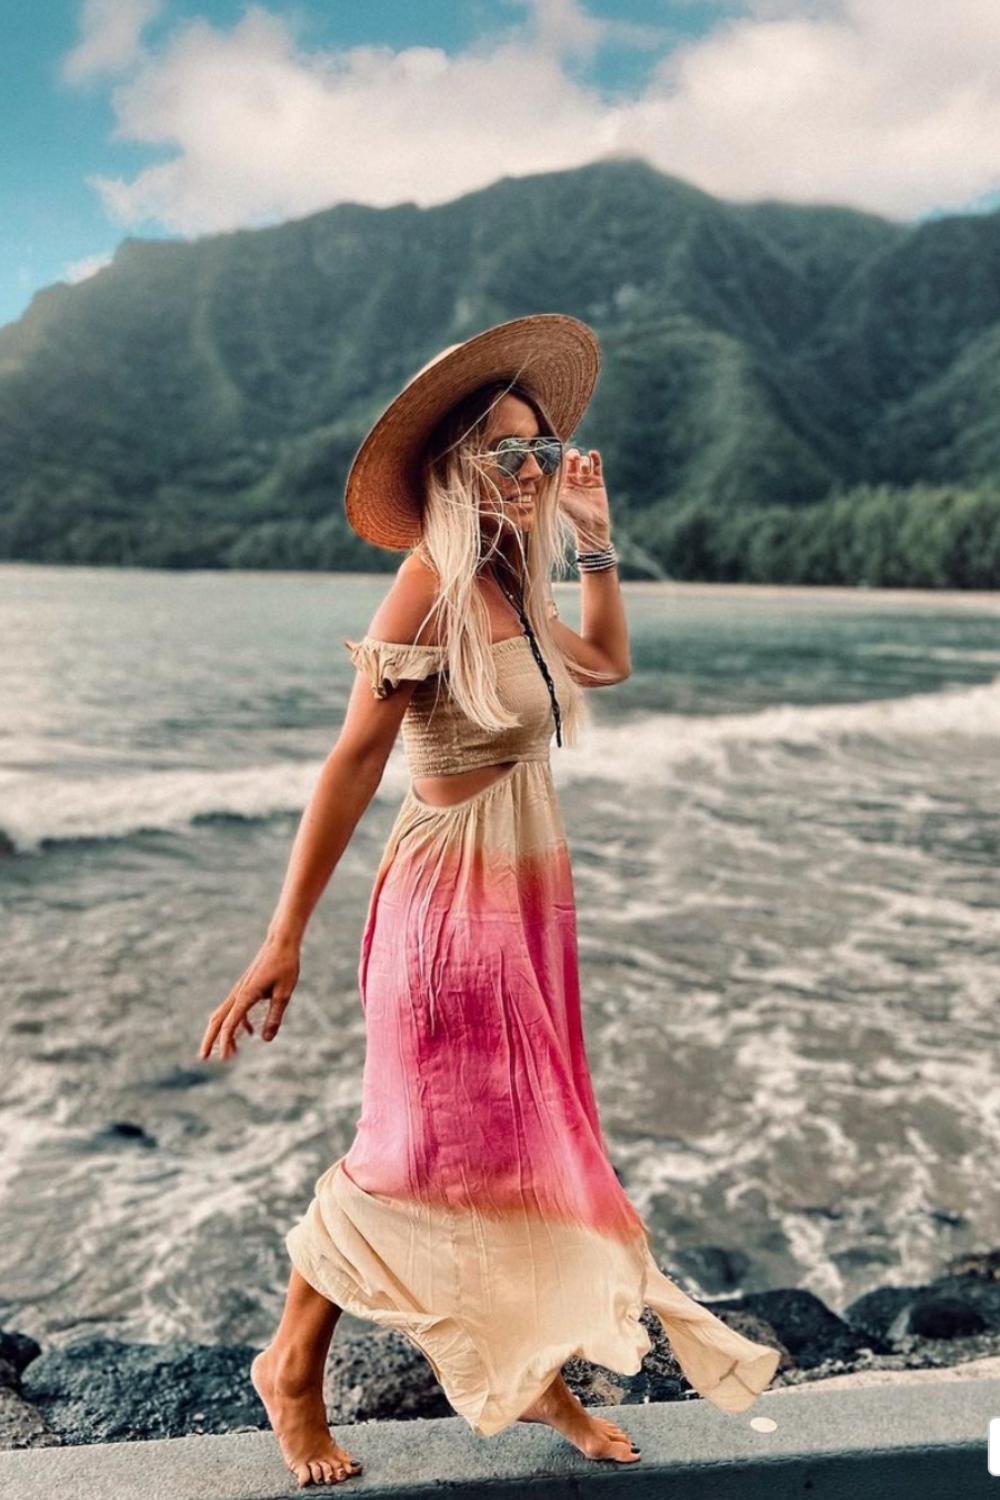 Discover the ultimate Hawaiian outfit inspiration with our top 21 ensemble ideas for every island activity. From beach lounging to elegant dinners, our packing list ensures you're stylishly prepared for paradise. #HawaiiFashion #TravelInStyle | Hawaii Outfit ideas | Hawaii Summer Outfit | Spring Outfit | Beach Outfit | Vacation Outfit | Hawaii Travel | What To Wear In Hawaii | Hawaii Packing List